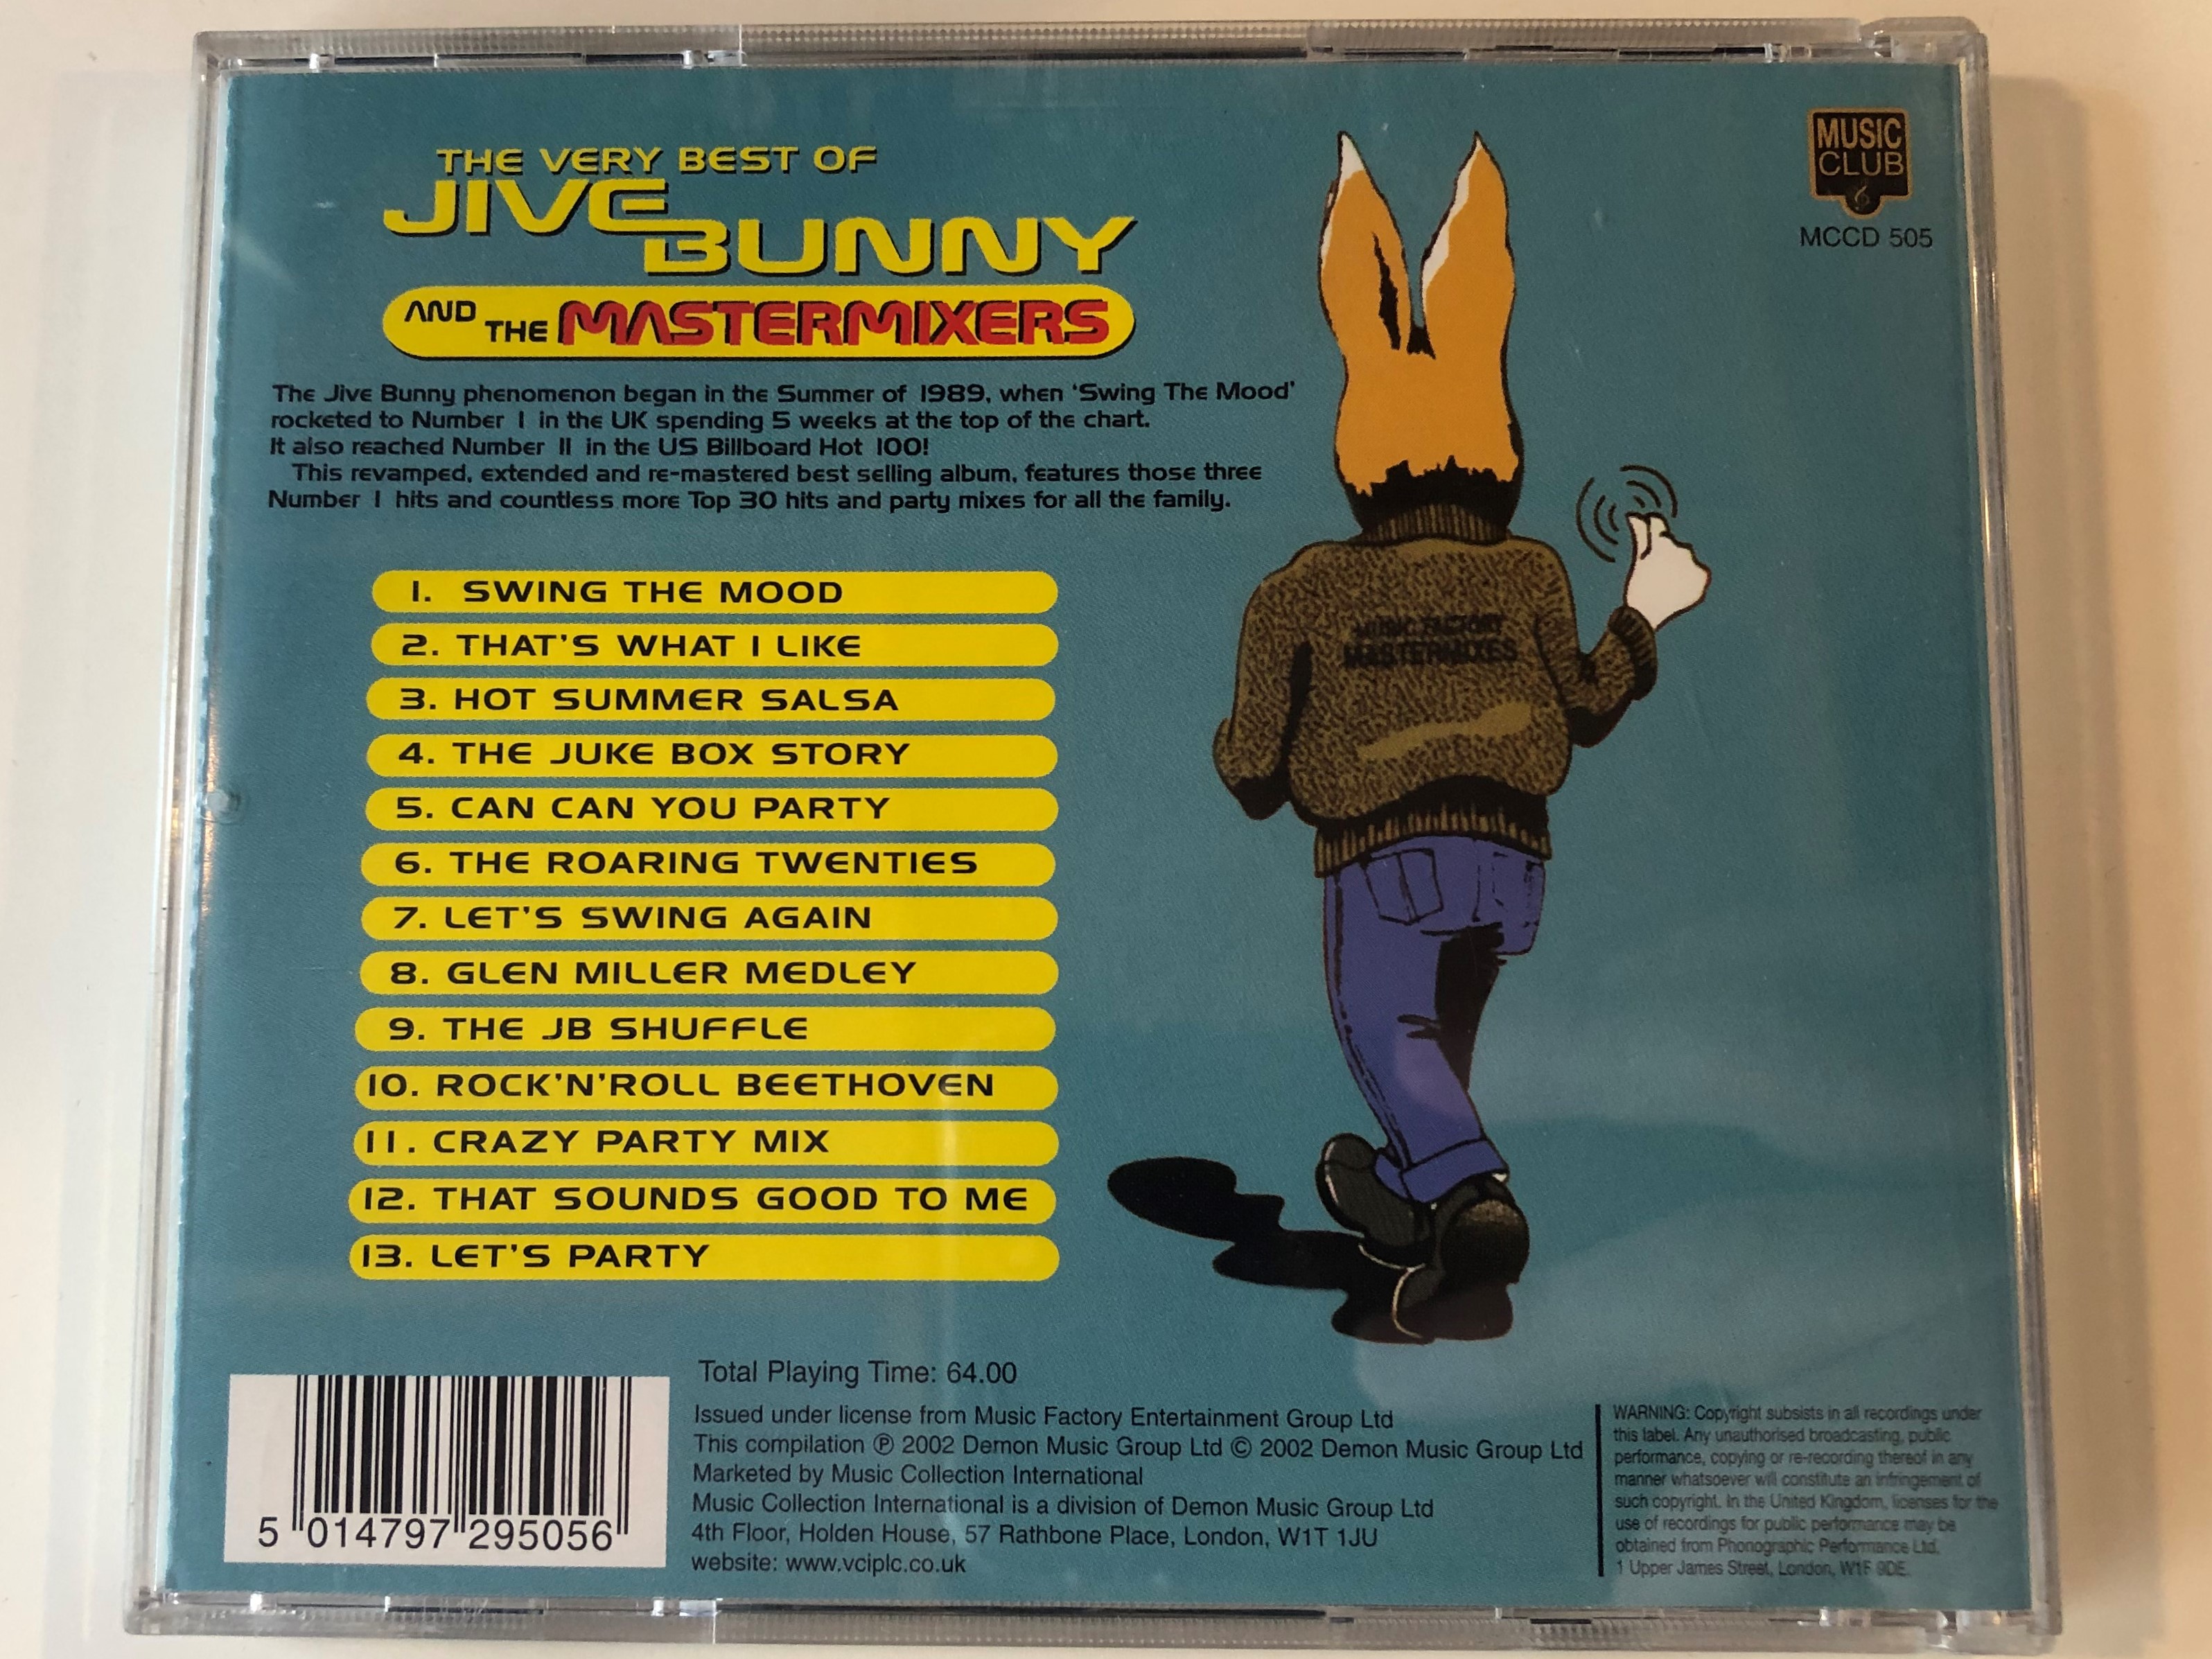 the-very-best-of-jive-bunny-and-the-mastermixers-over-an-hour-of-party-hits-including-swing-the-mood-that-s-what-i-like-let-s-party-that-sounds-good-to-me-can-can-you-party-music-club-.jpg